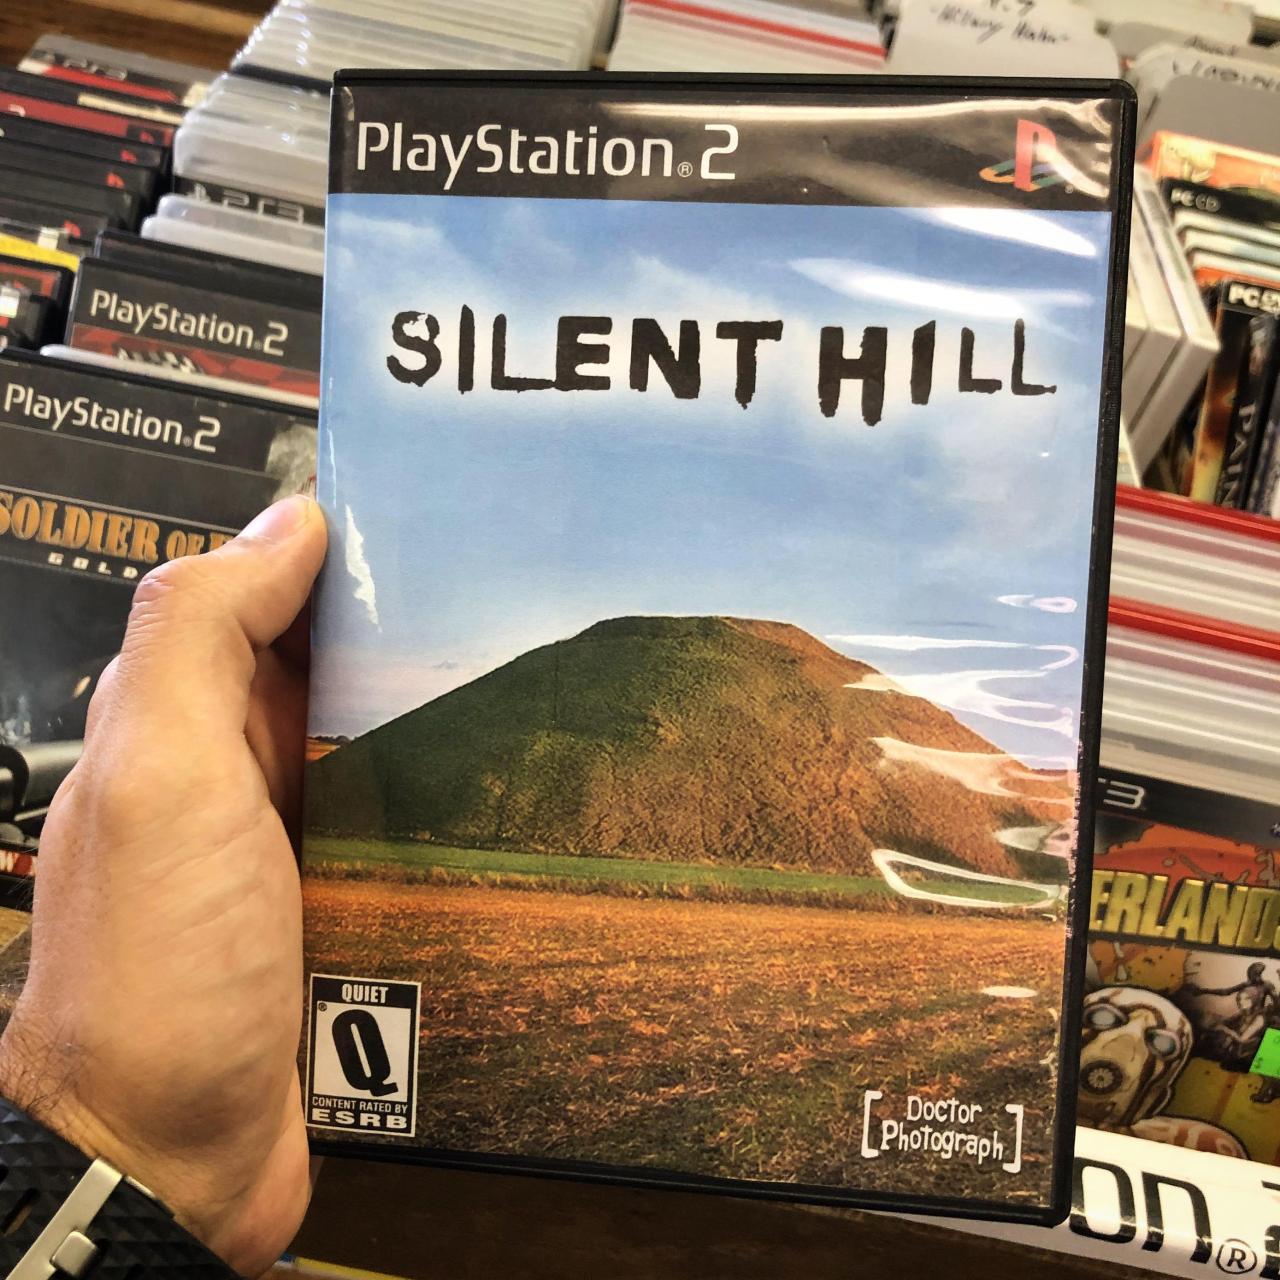 funny gaming memes - they don t make games like they used to - chany PlayStation 2 Pecd Pcs PlayStation 2 Silent Hill PlayStation 2 Soldier Op Em 3 Erlanl. Quiet Content Rated By Esrb photograph On